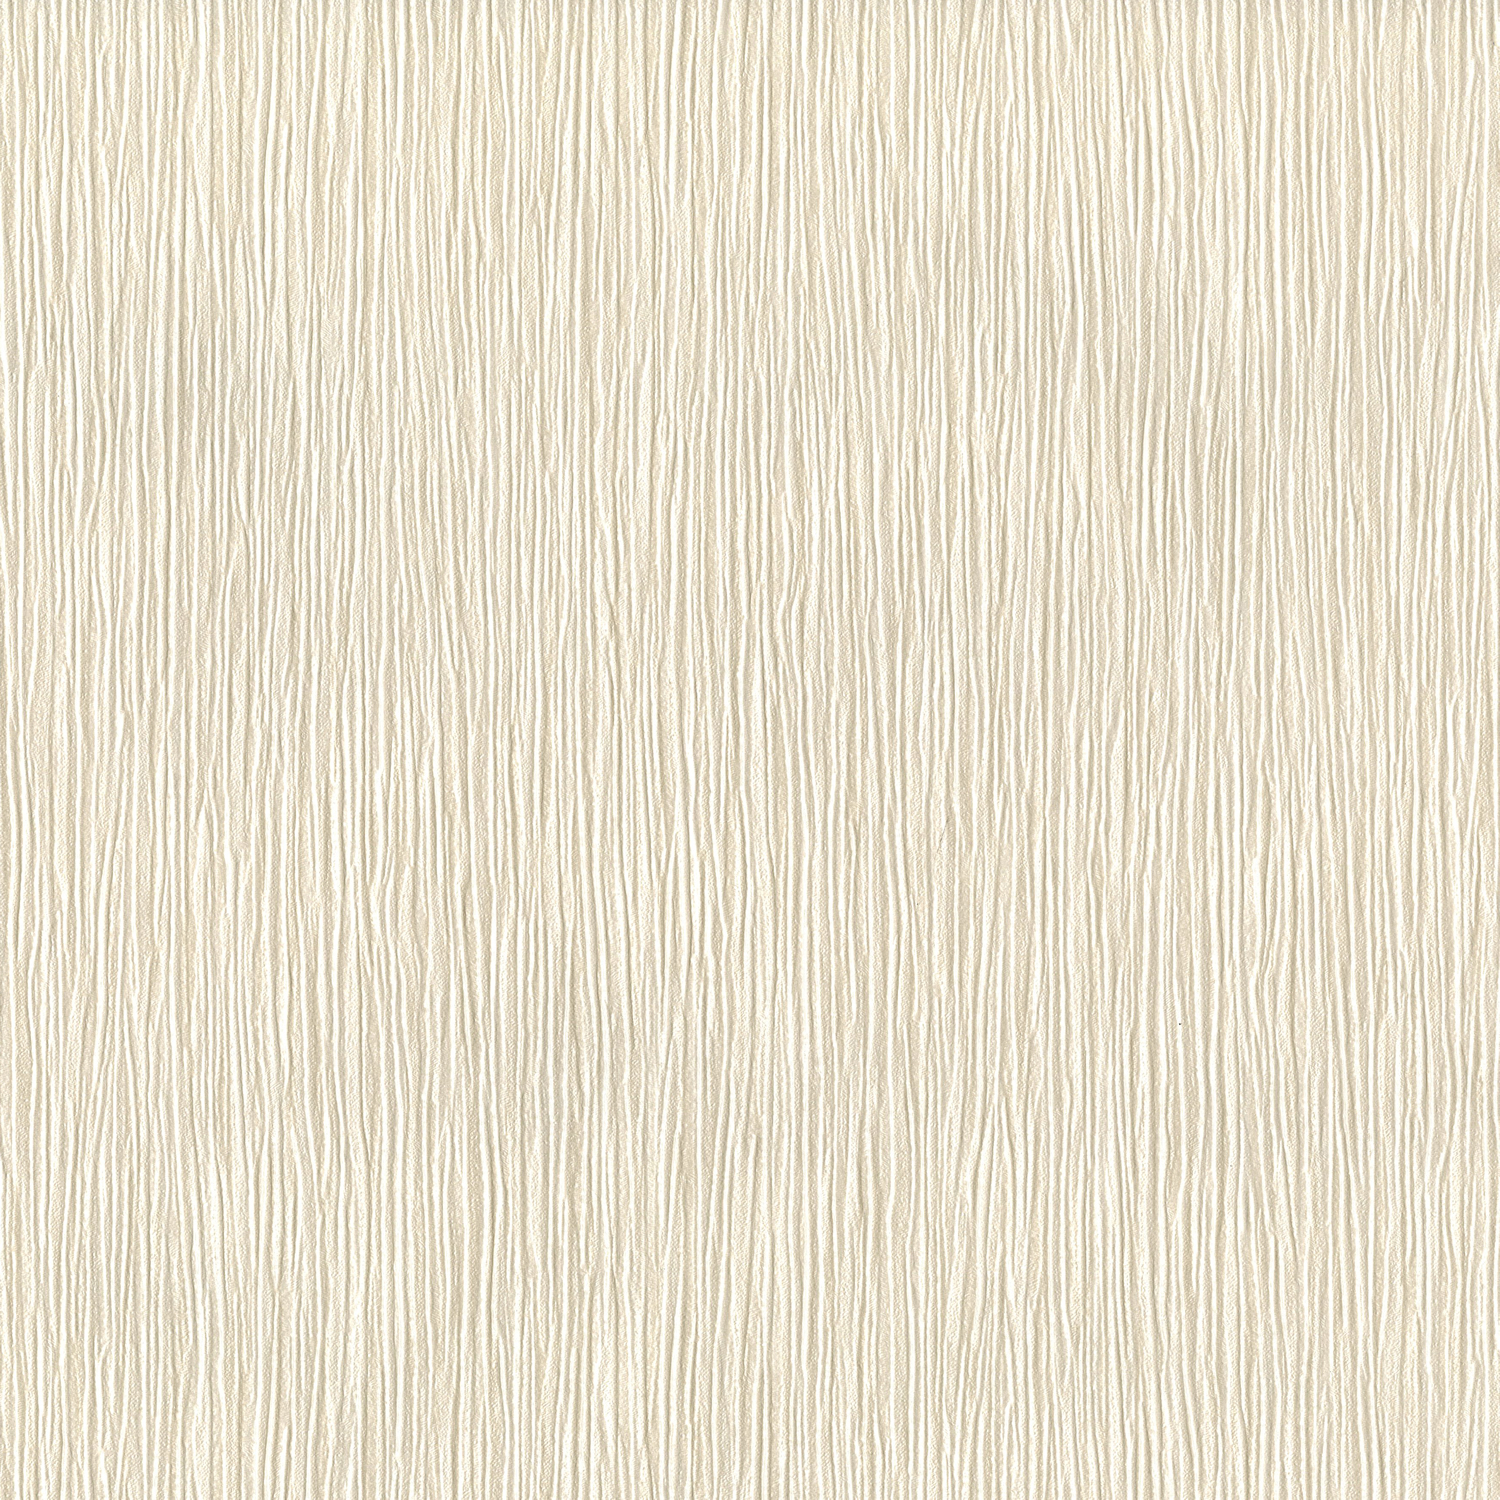 Muriva Kate Texture Cream Wallpaper 8m Roll Next Day Delivery